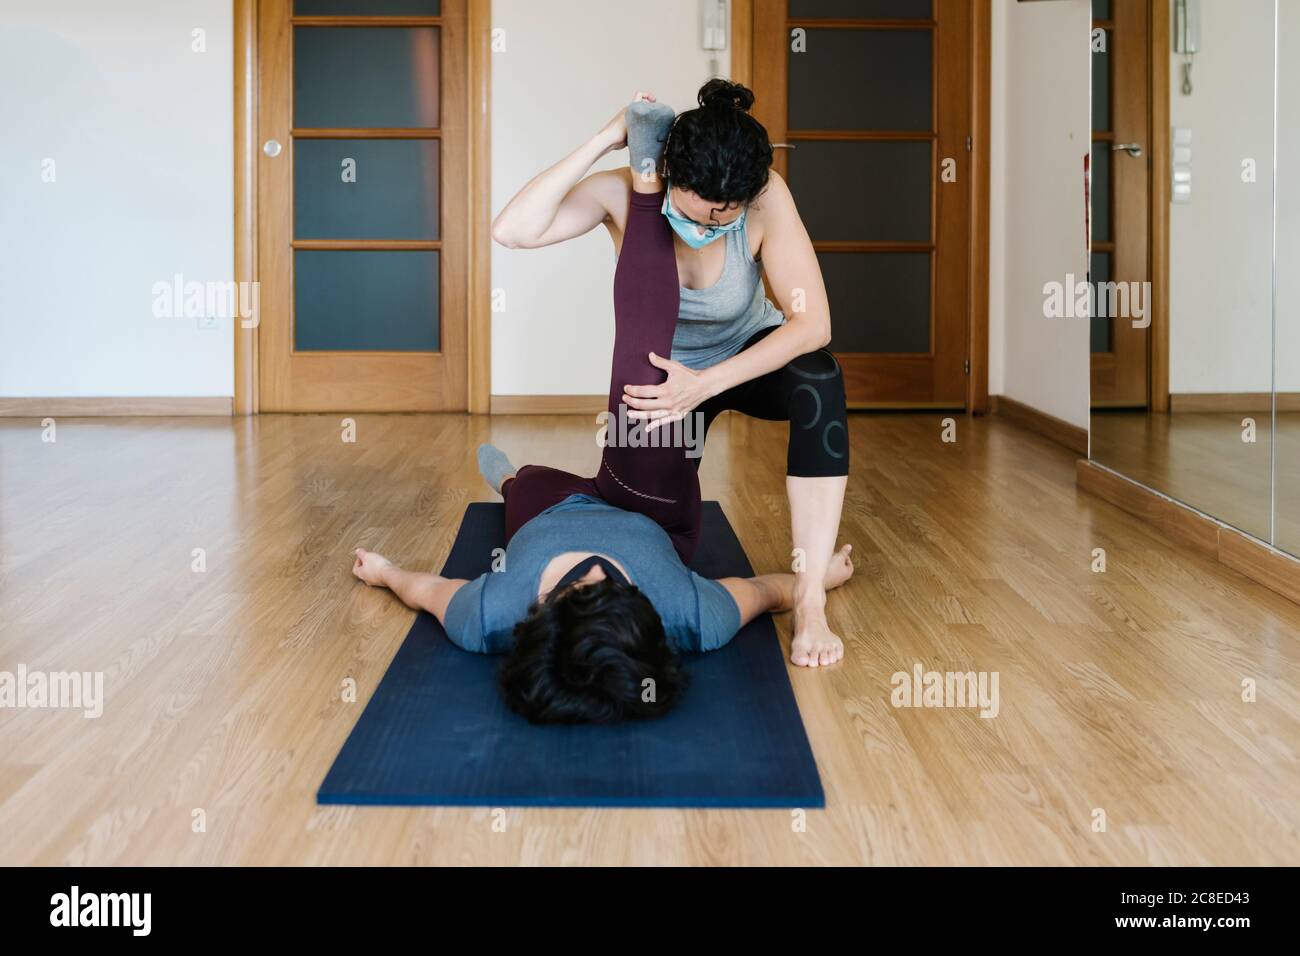 Physiotherapist wearing mask stretching patient's leg lying on exercise mat Stock Photo